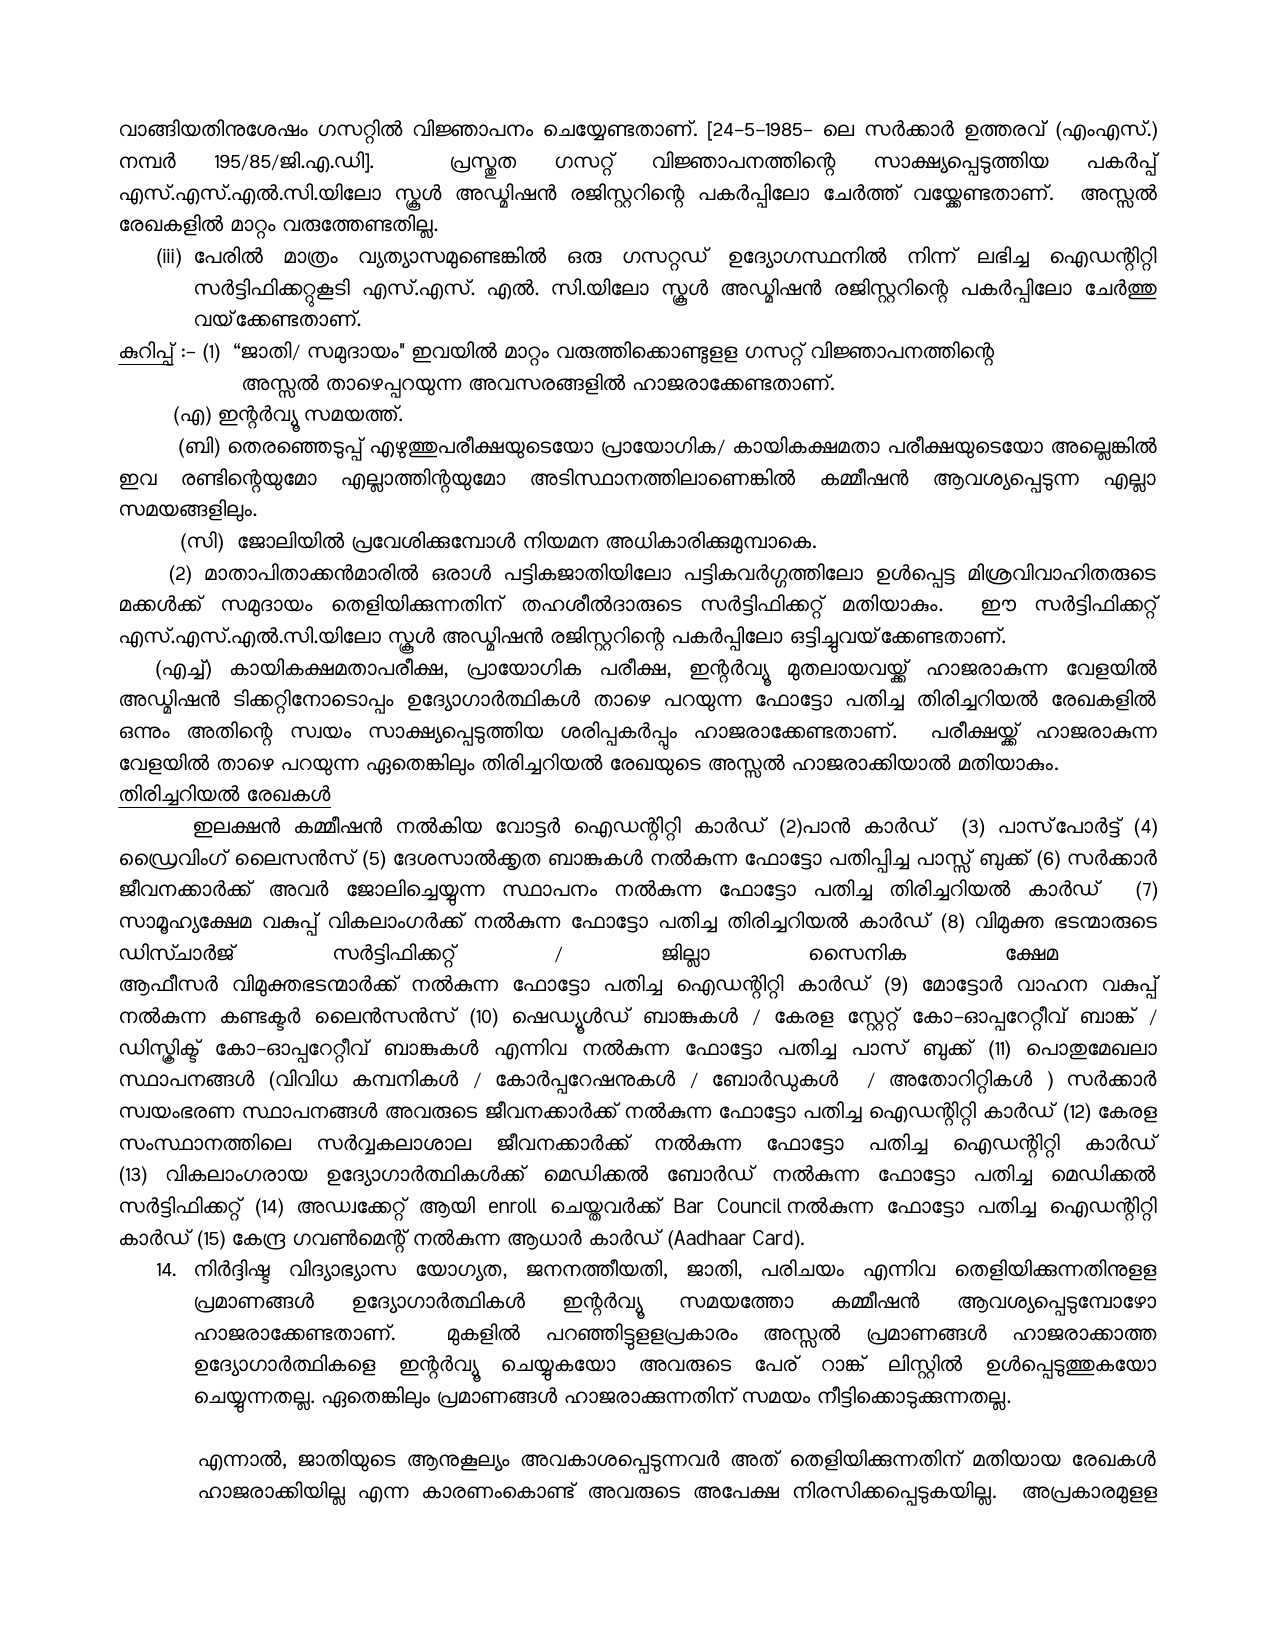 General Conditions and Certificate Formats in Malayalam - Notification Image 18